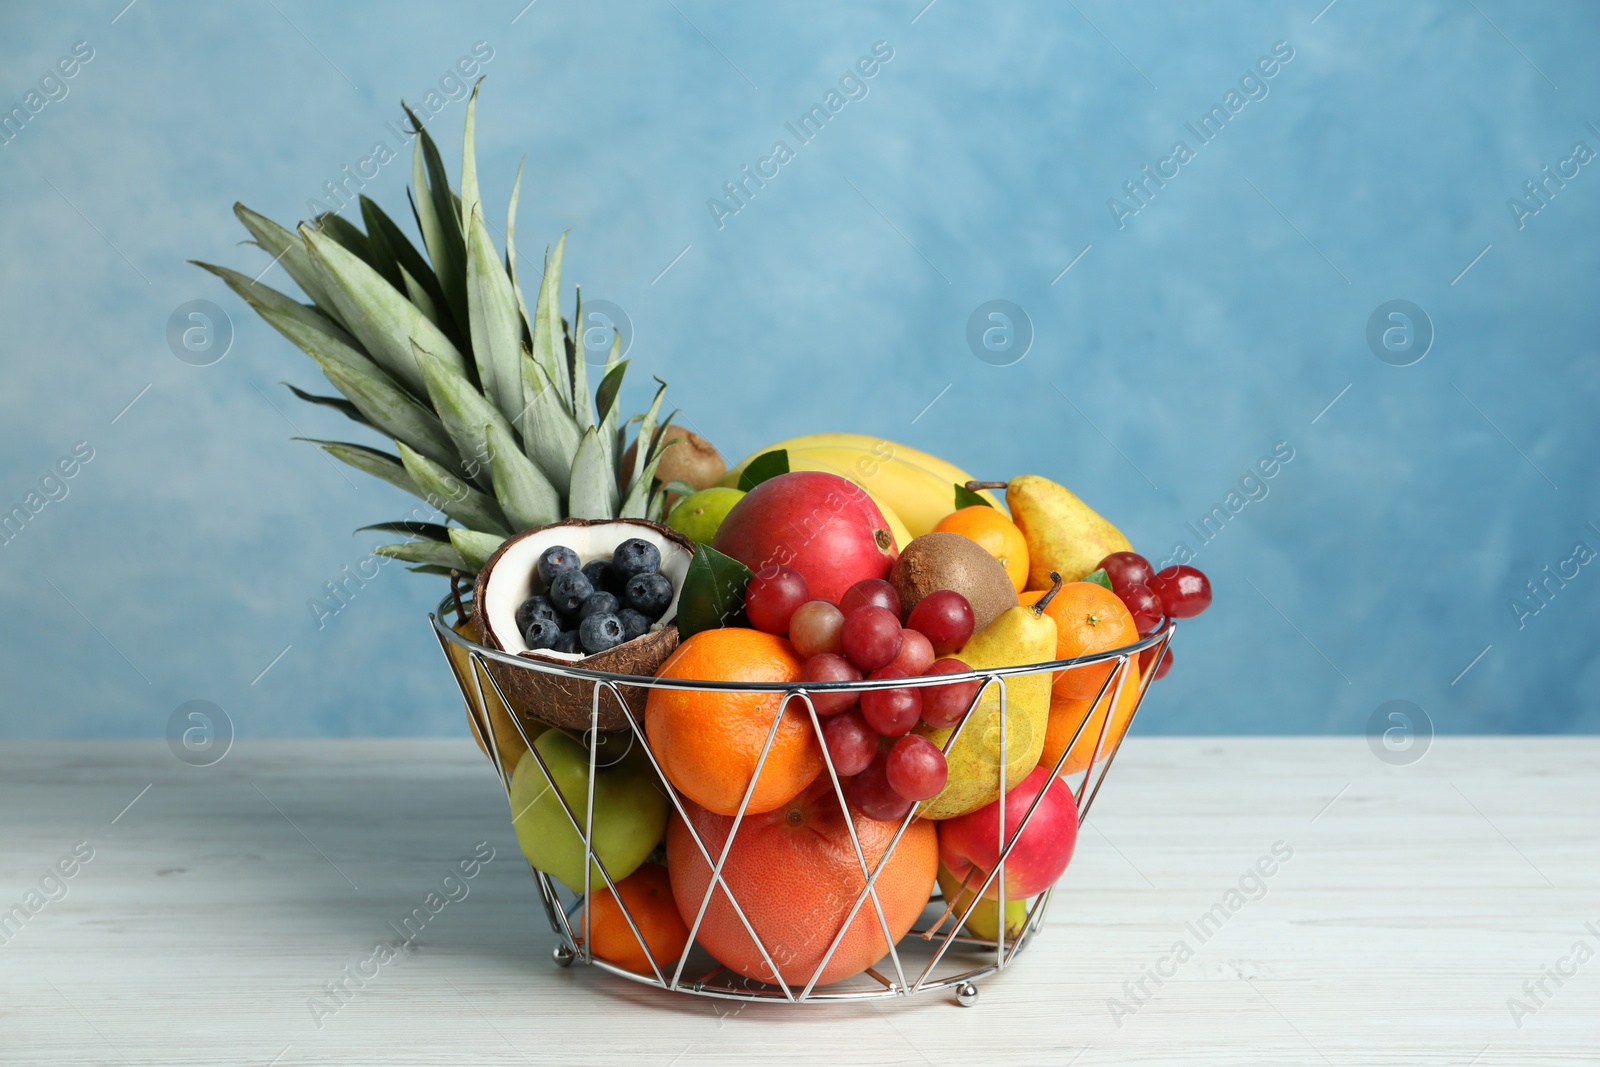 Photo of Assortment of fresh exotic fruits in metal basket on white wooden table against light blue background